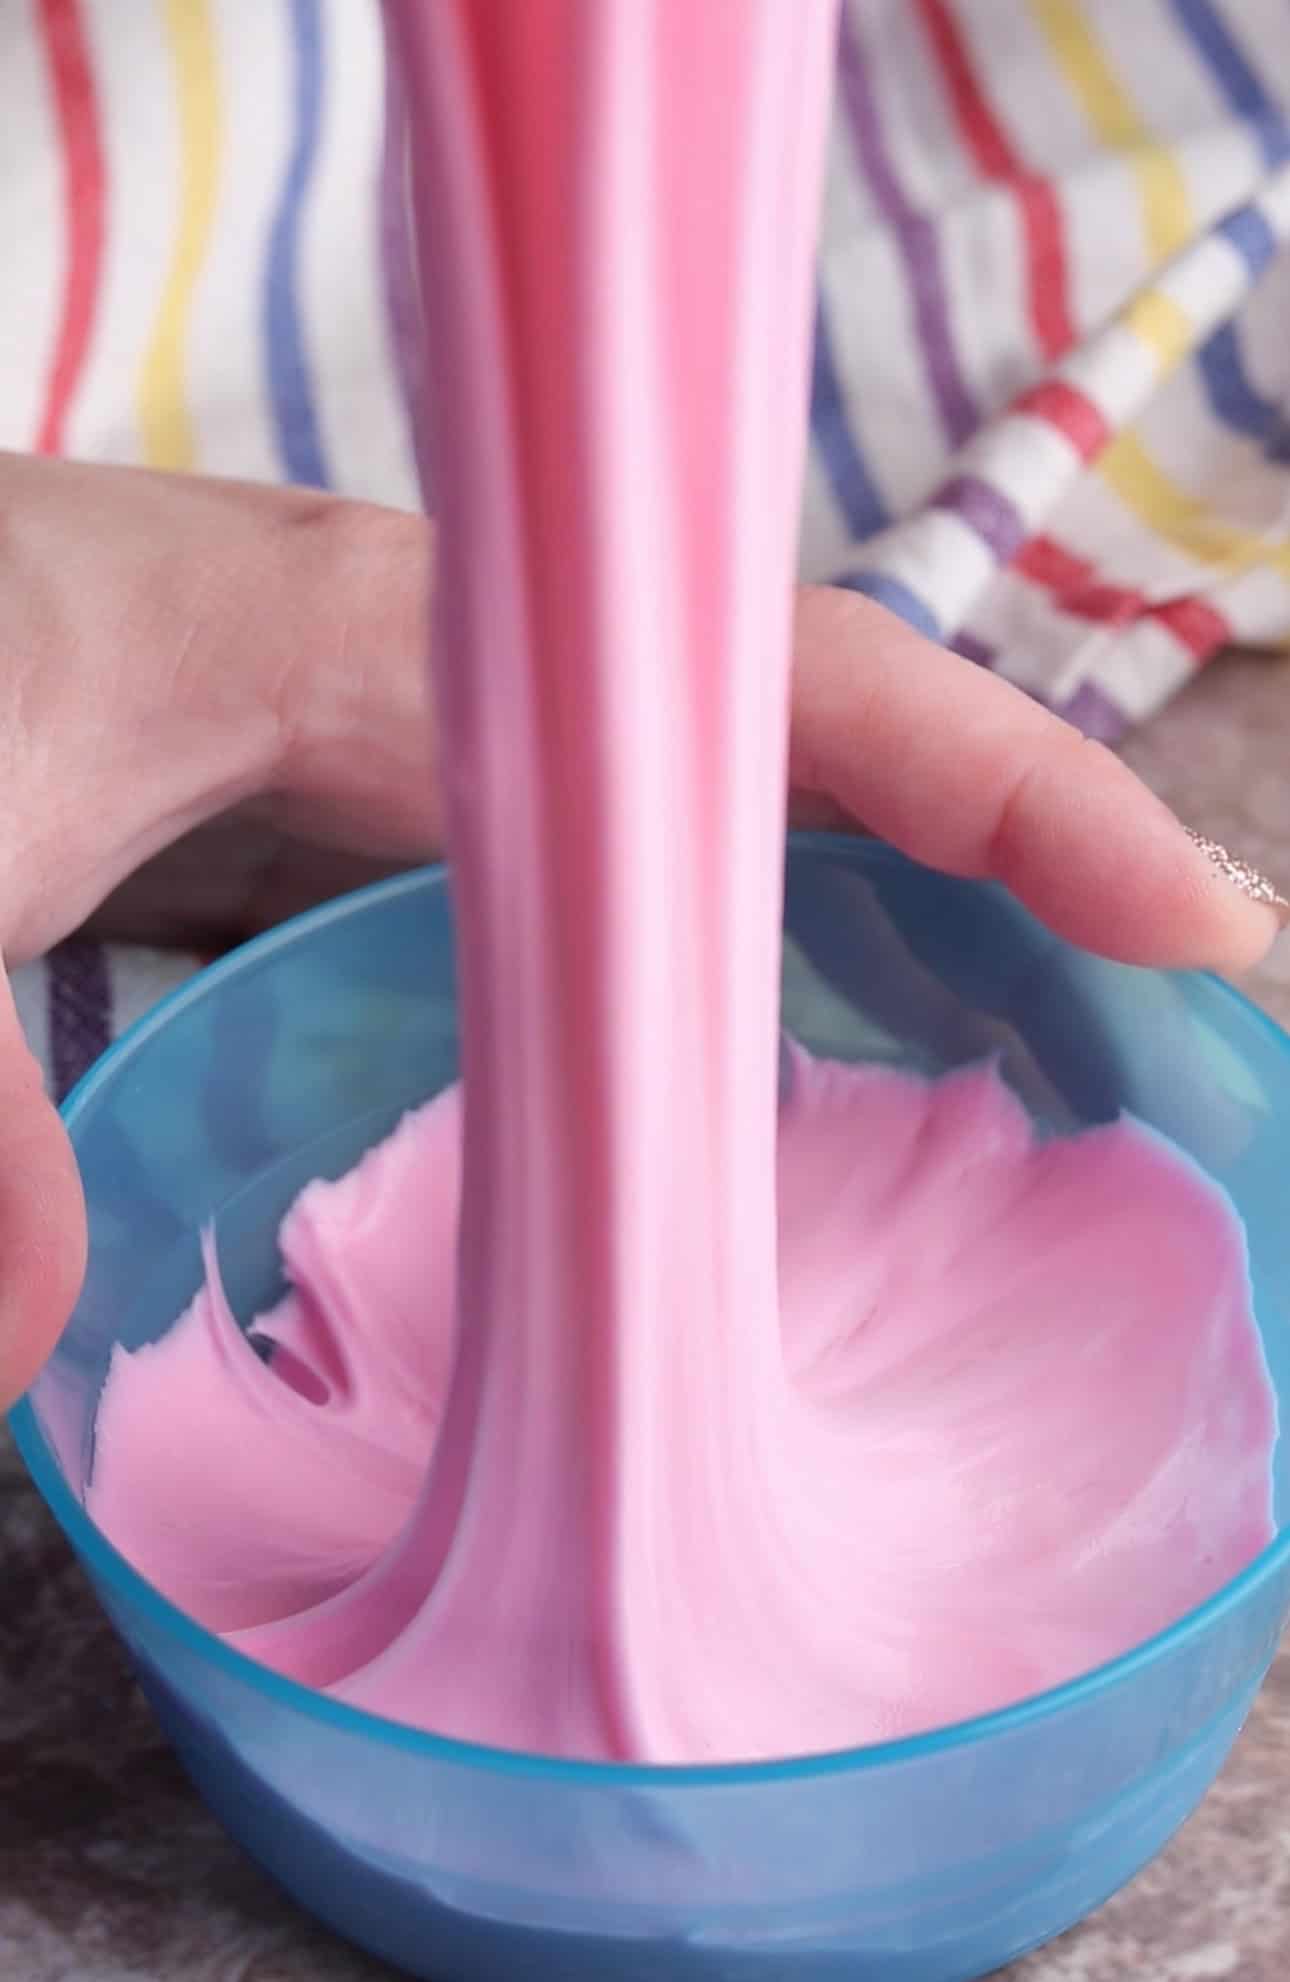 2 Ingredients Slime Sensory Recipe (Homemade Silly Putty)